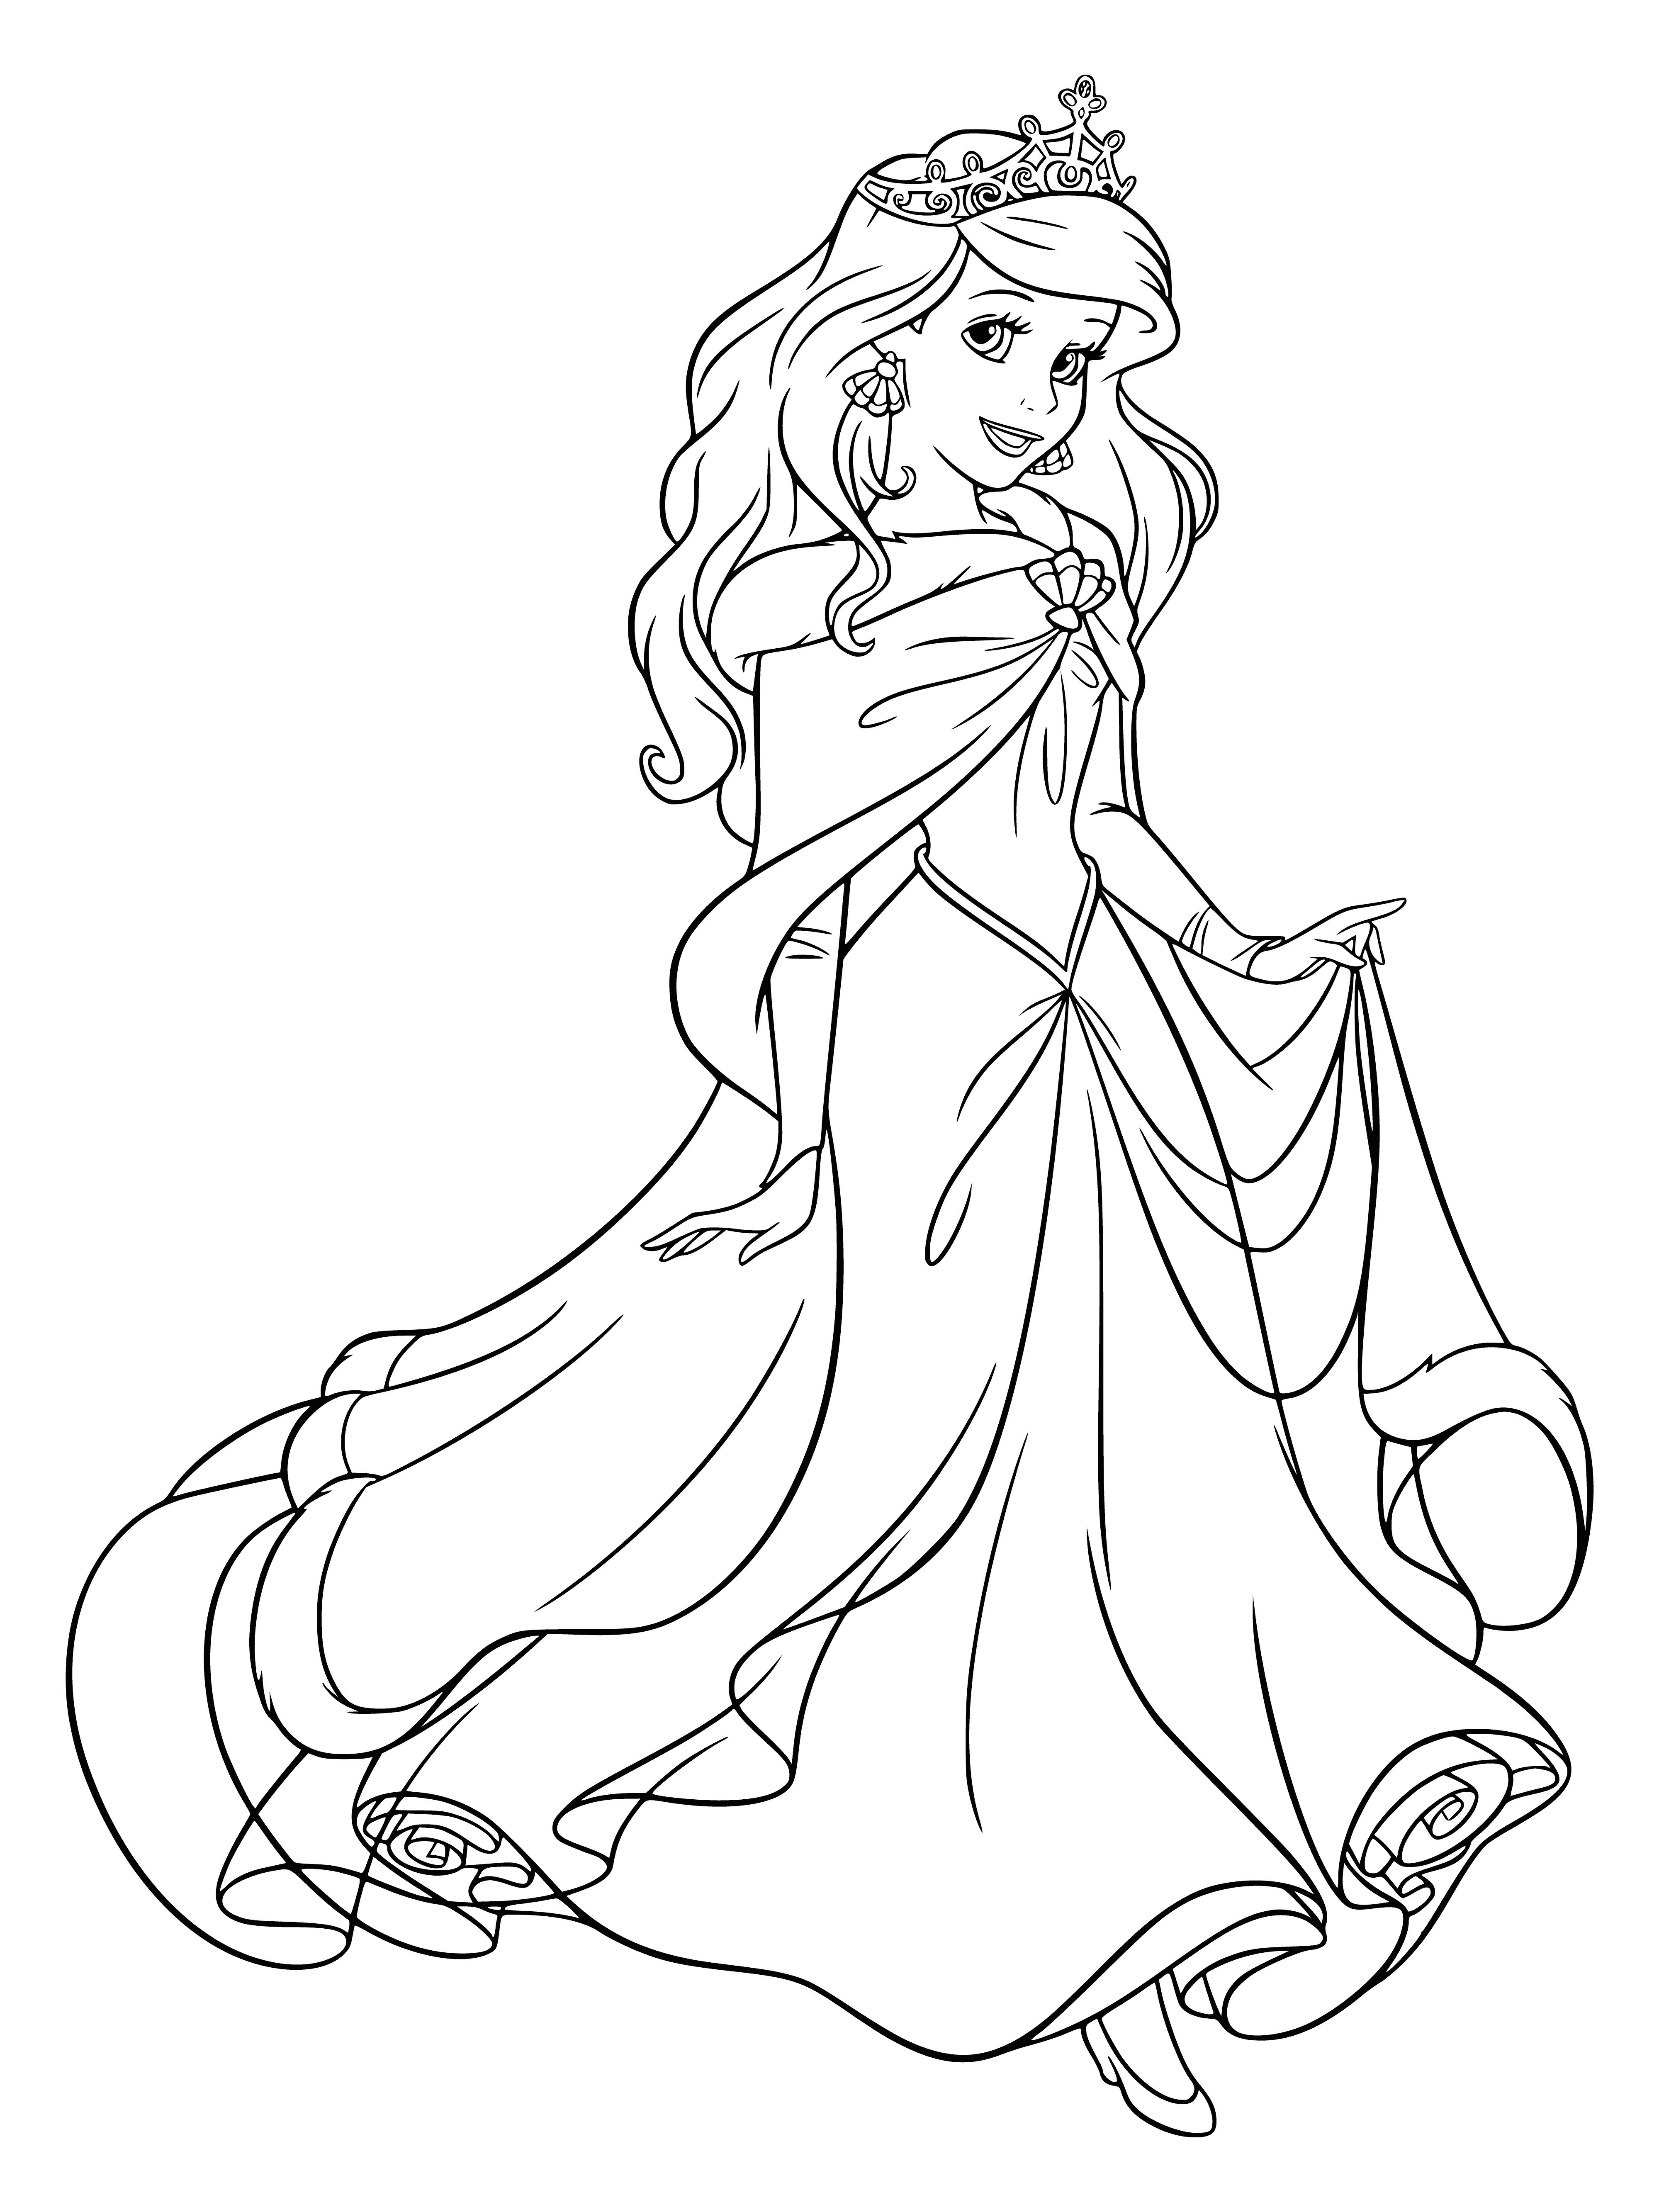 coloring page: Disney princesses are celebrating New Year in a winter cloak, surrounding Ariel and looking excited! #happynewyear